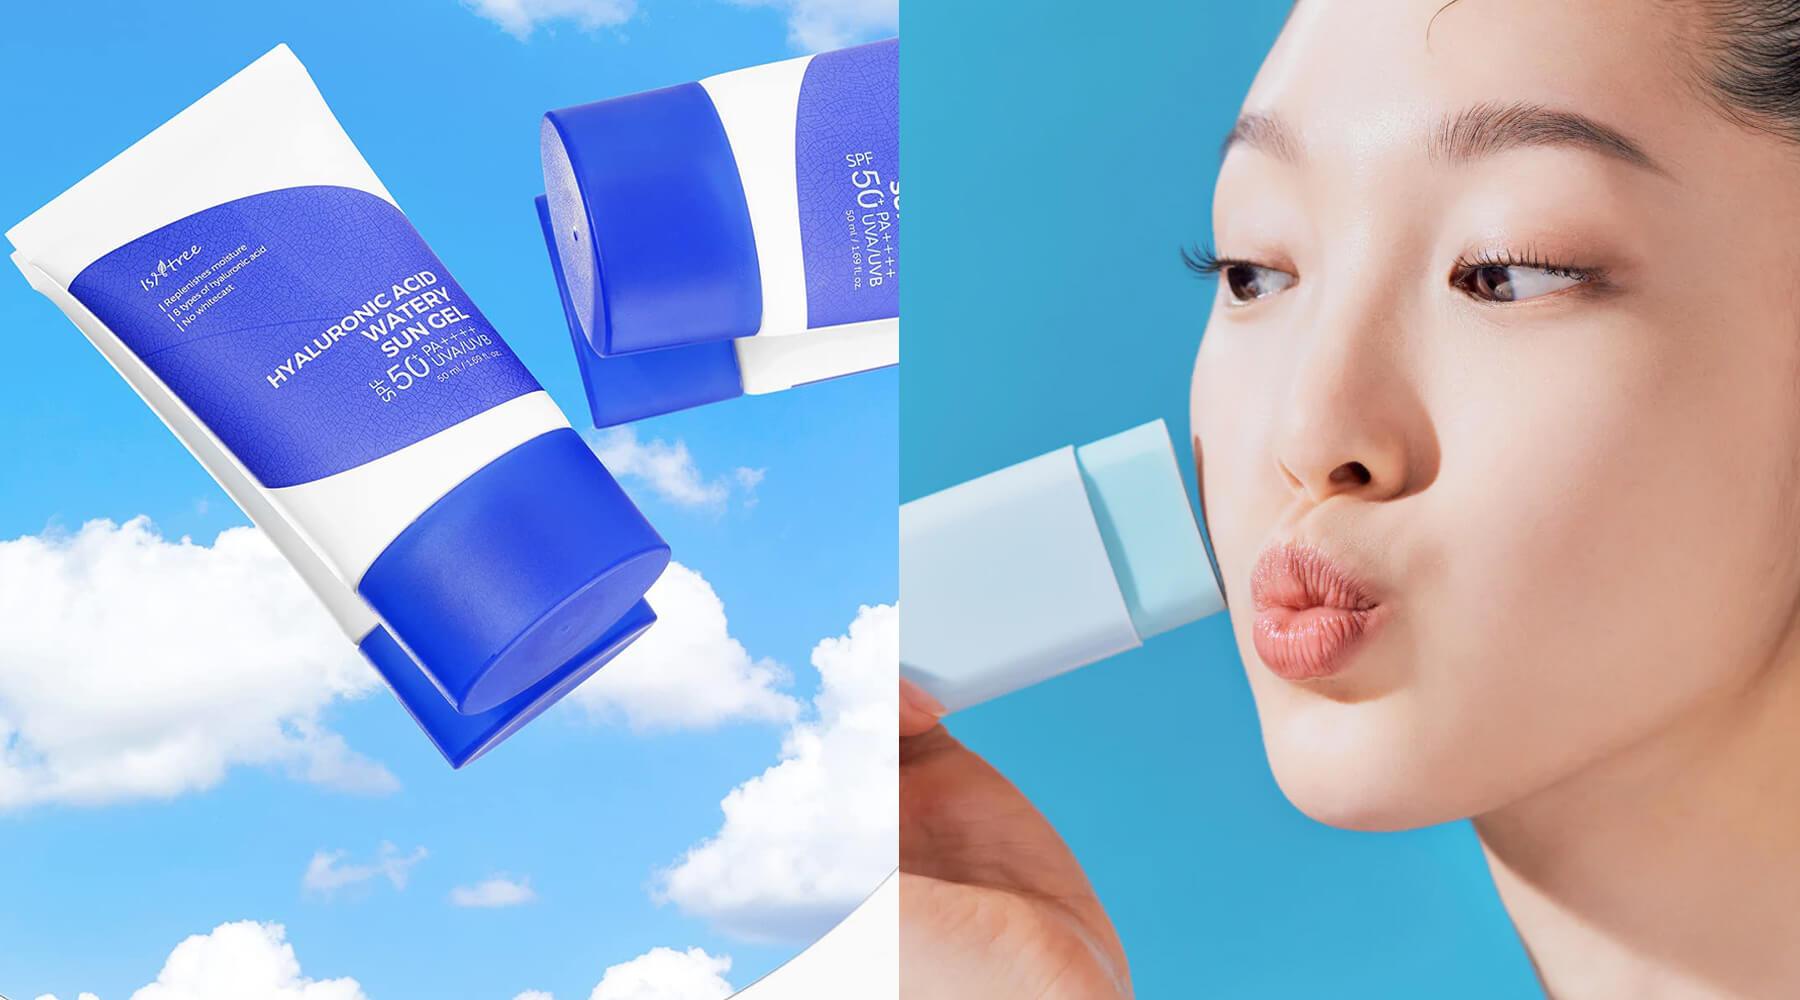 Save Your Face! The Importance of Sunscreen - K-Beauty Arabia